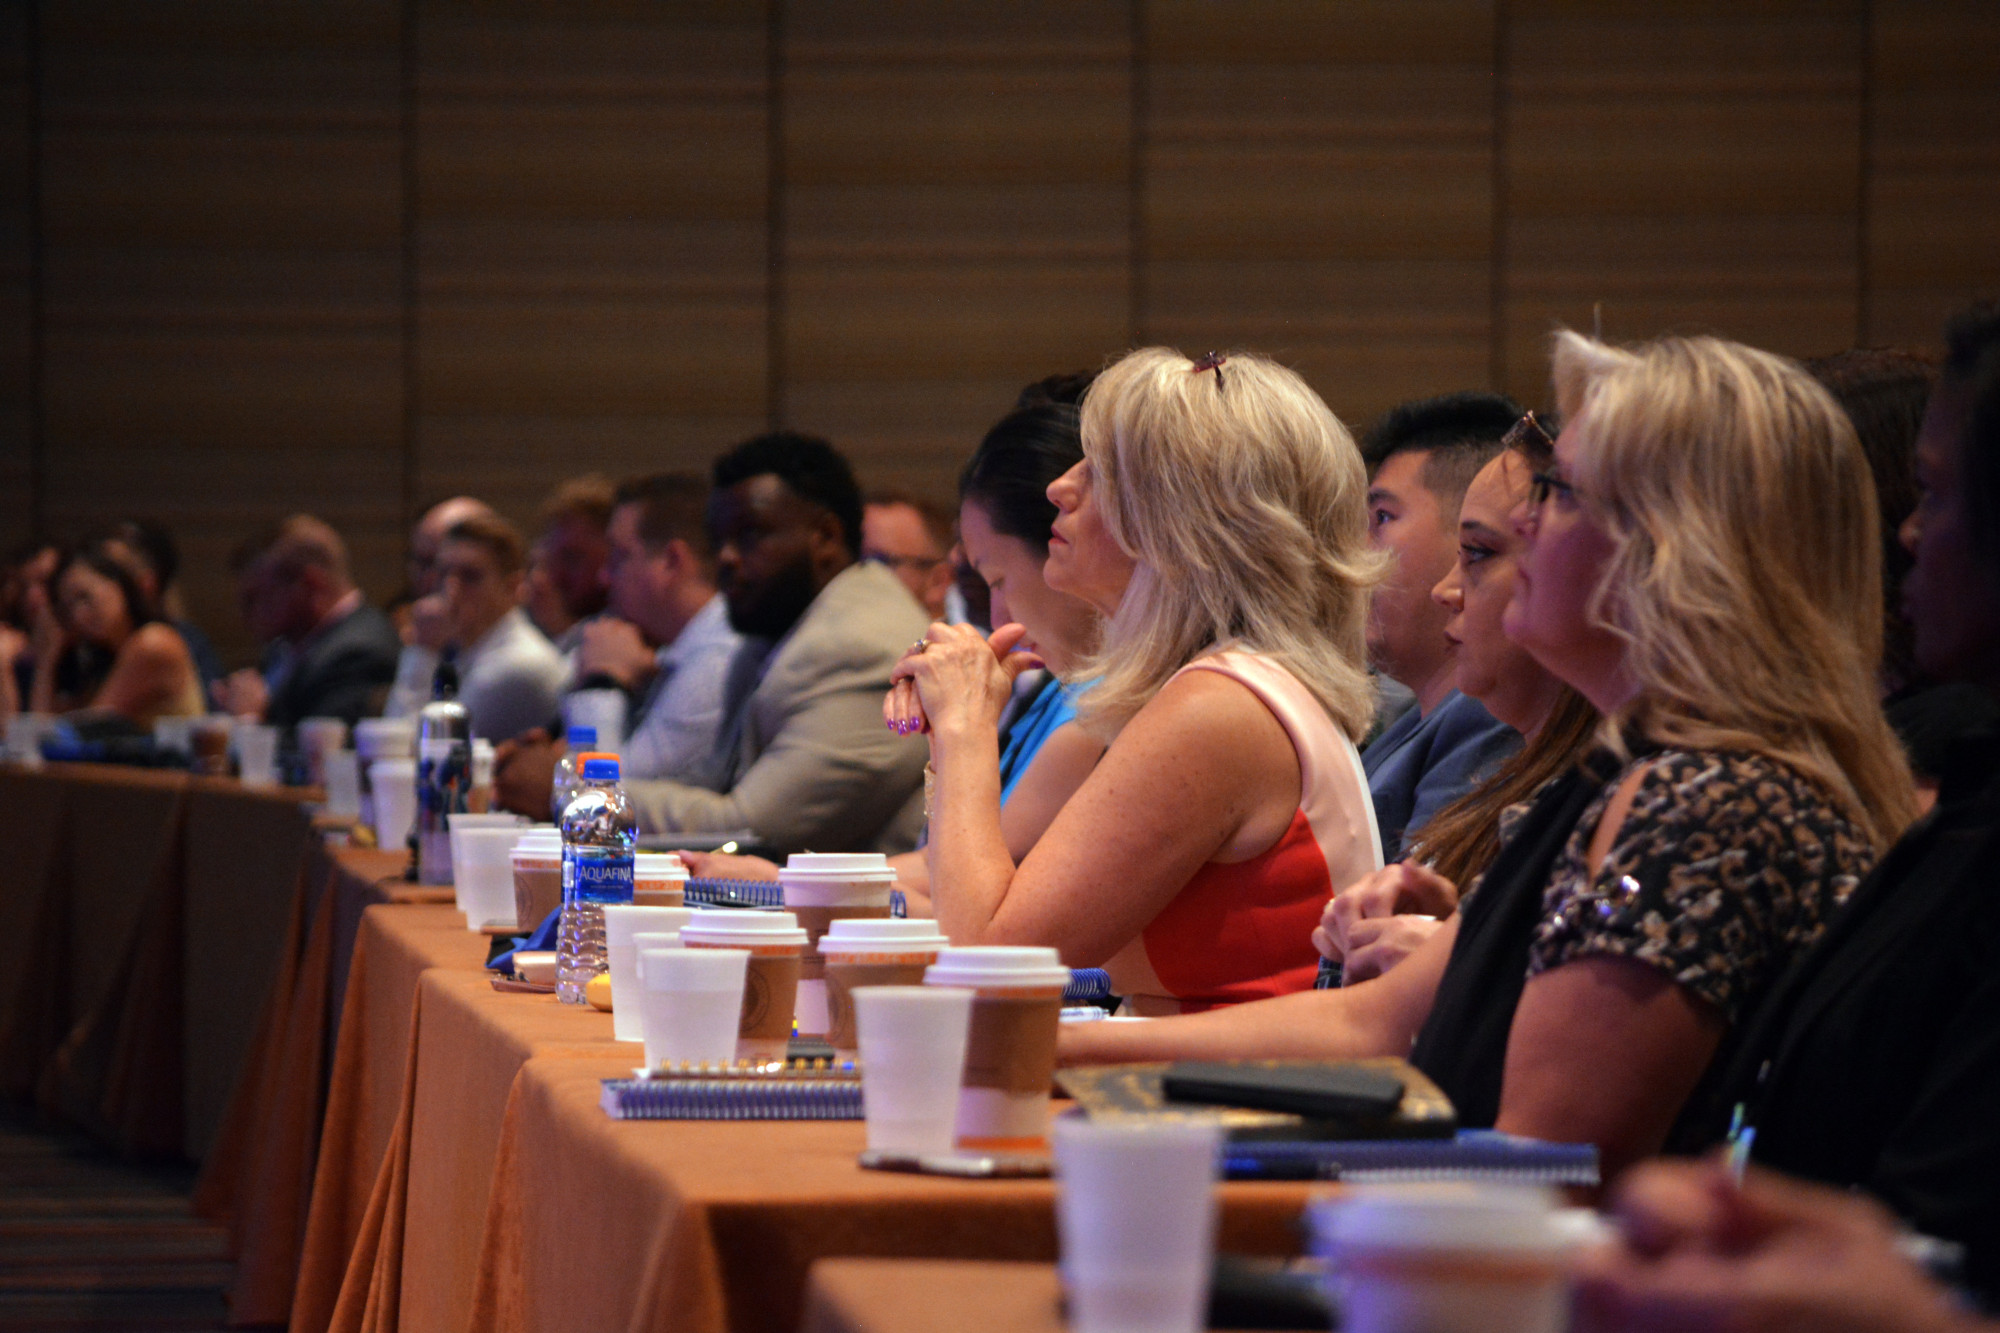 This is a photograph of an audience sitting on chairs at tables with cups of beverages like coffee and water. They appear to be watching and listening to something in front of them, paying attention to it. There is one blonde woman who is the focus of the photo, with others blurred in the distance. It appears they are at a conference, and are attending a presentation.